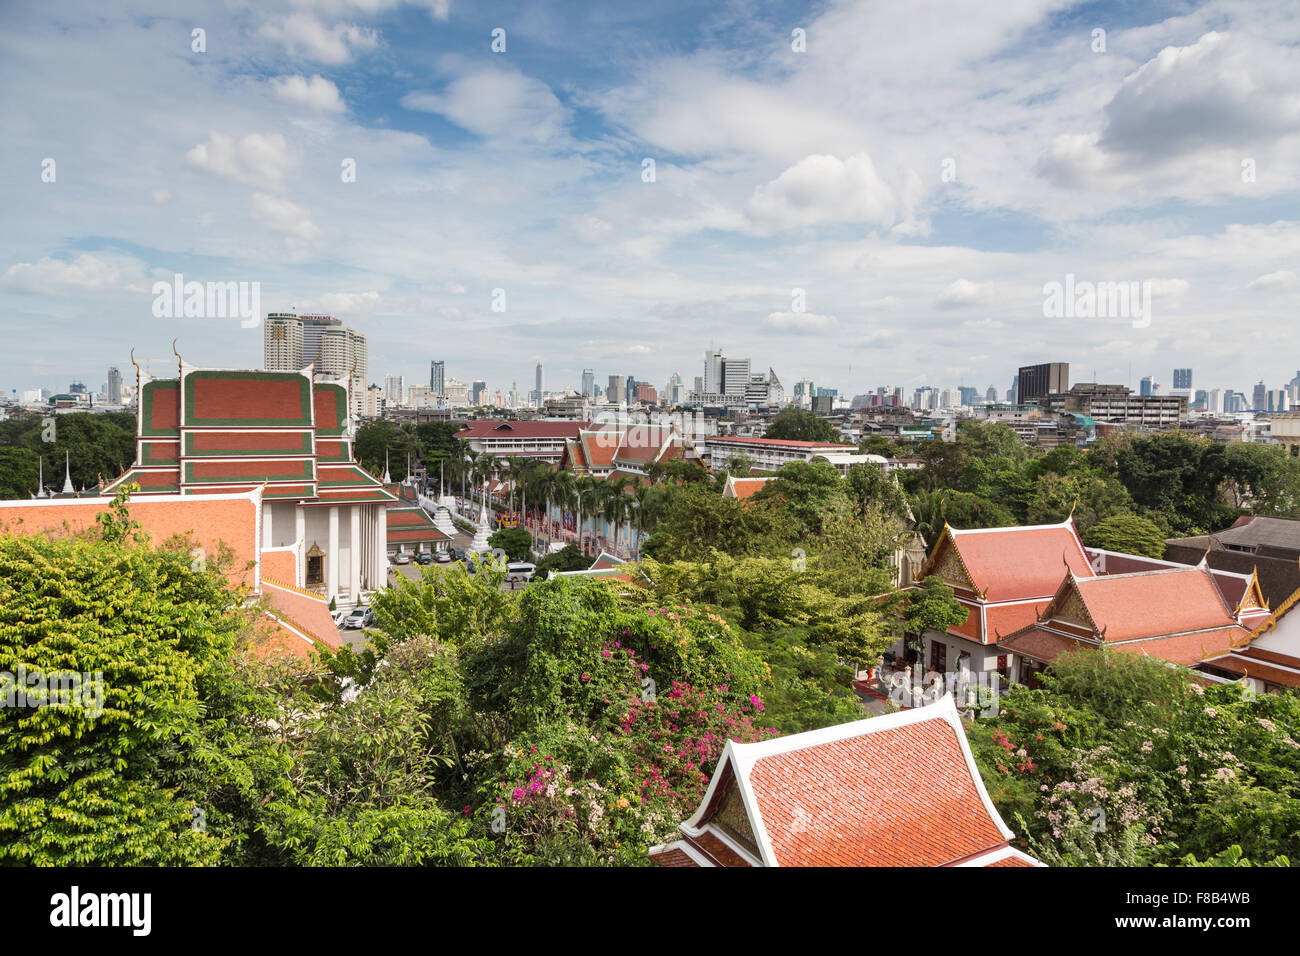 A Bangkok cityscape mixing traditional Buddhist temples and modern buildings in the background in Thailand capital city Stock Photo